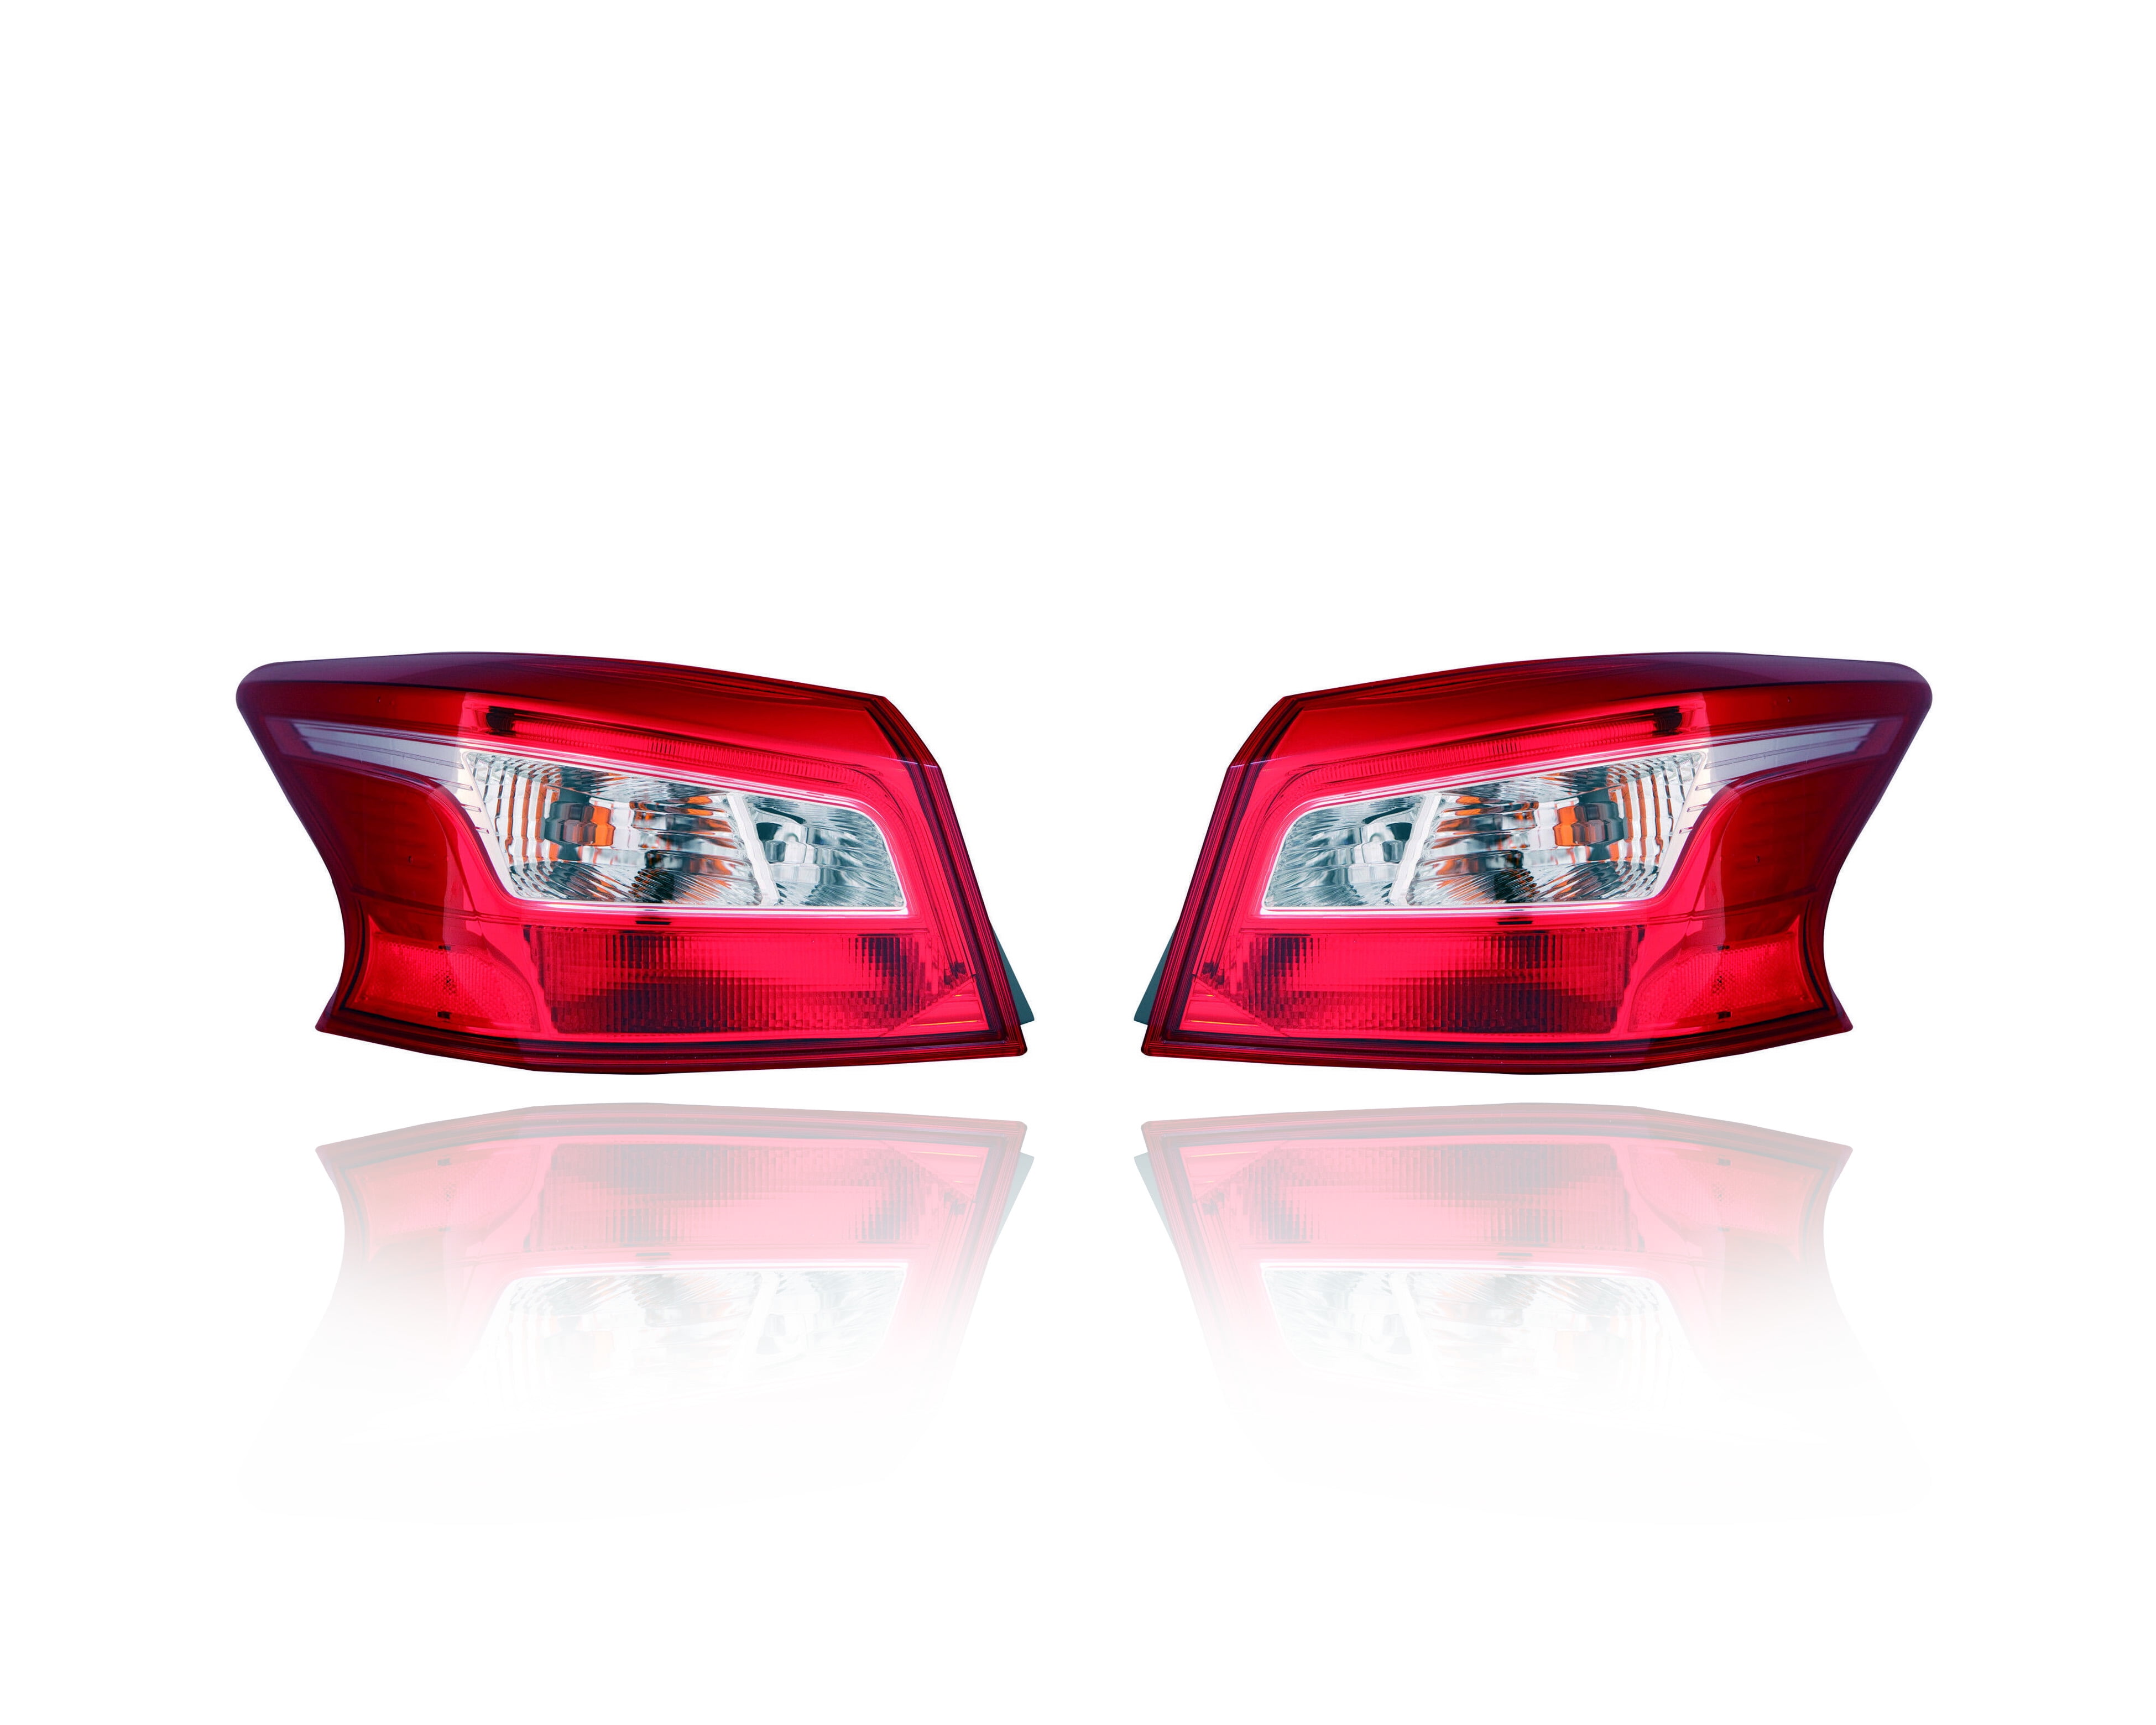 Fit Nissan 02-06 Altima Replacement Rear Tail Brake Lights Pair Set